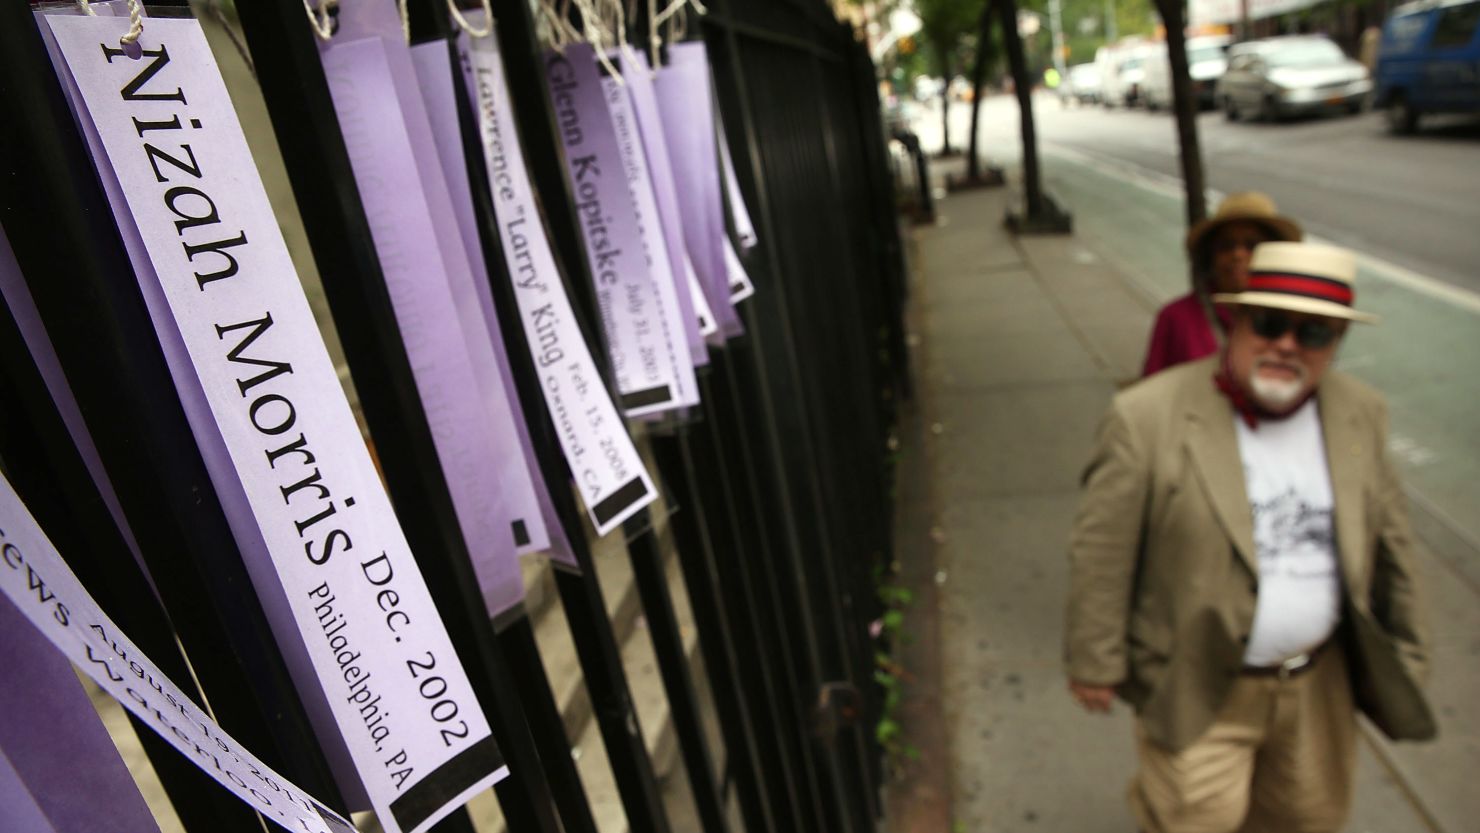 The names of victims of bias crimes are displayed on ribbons Wednesday in New York City. 